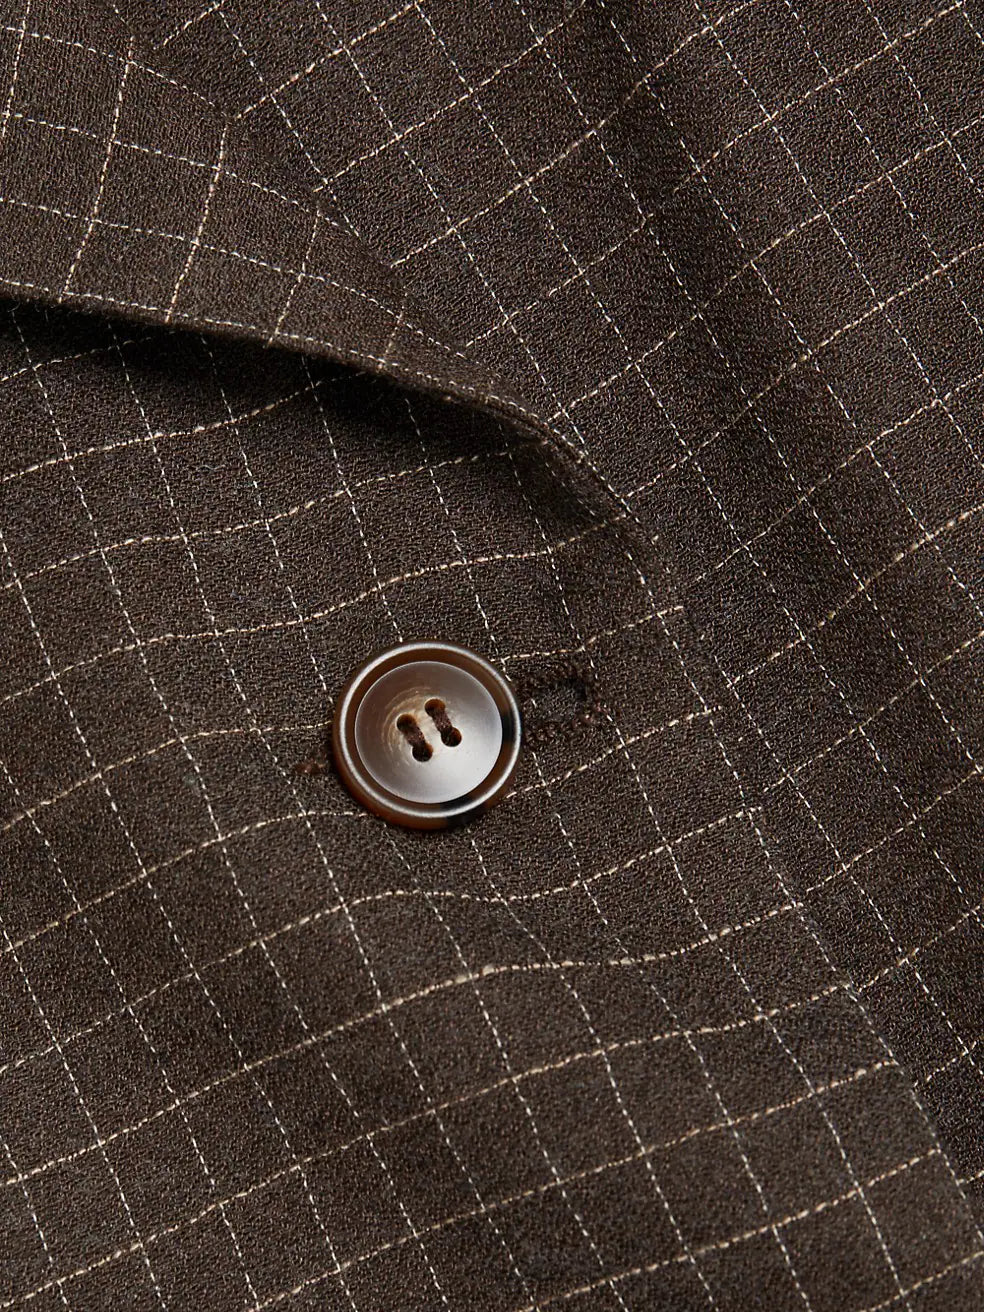 close up of fabric button